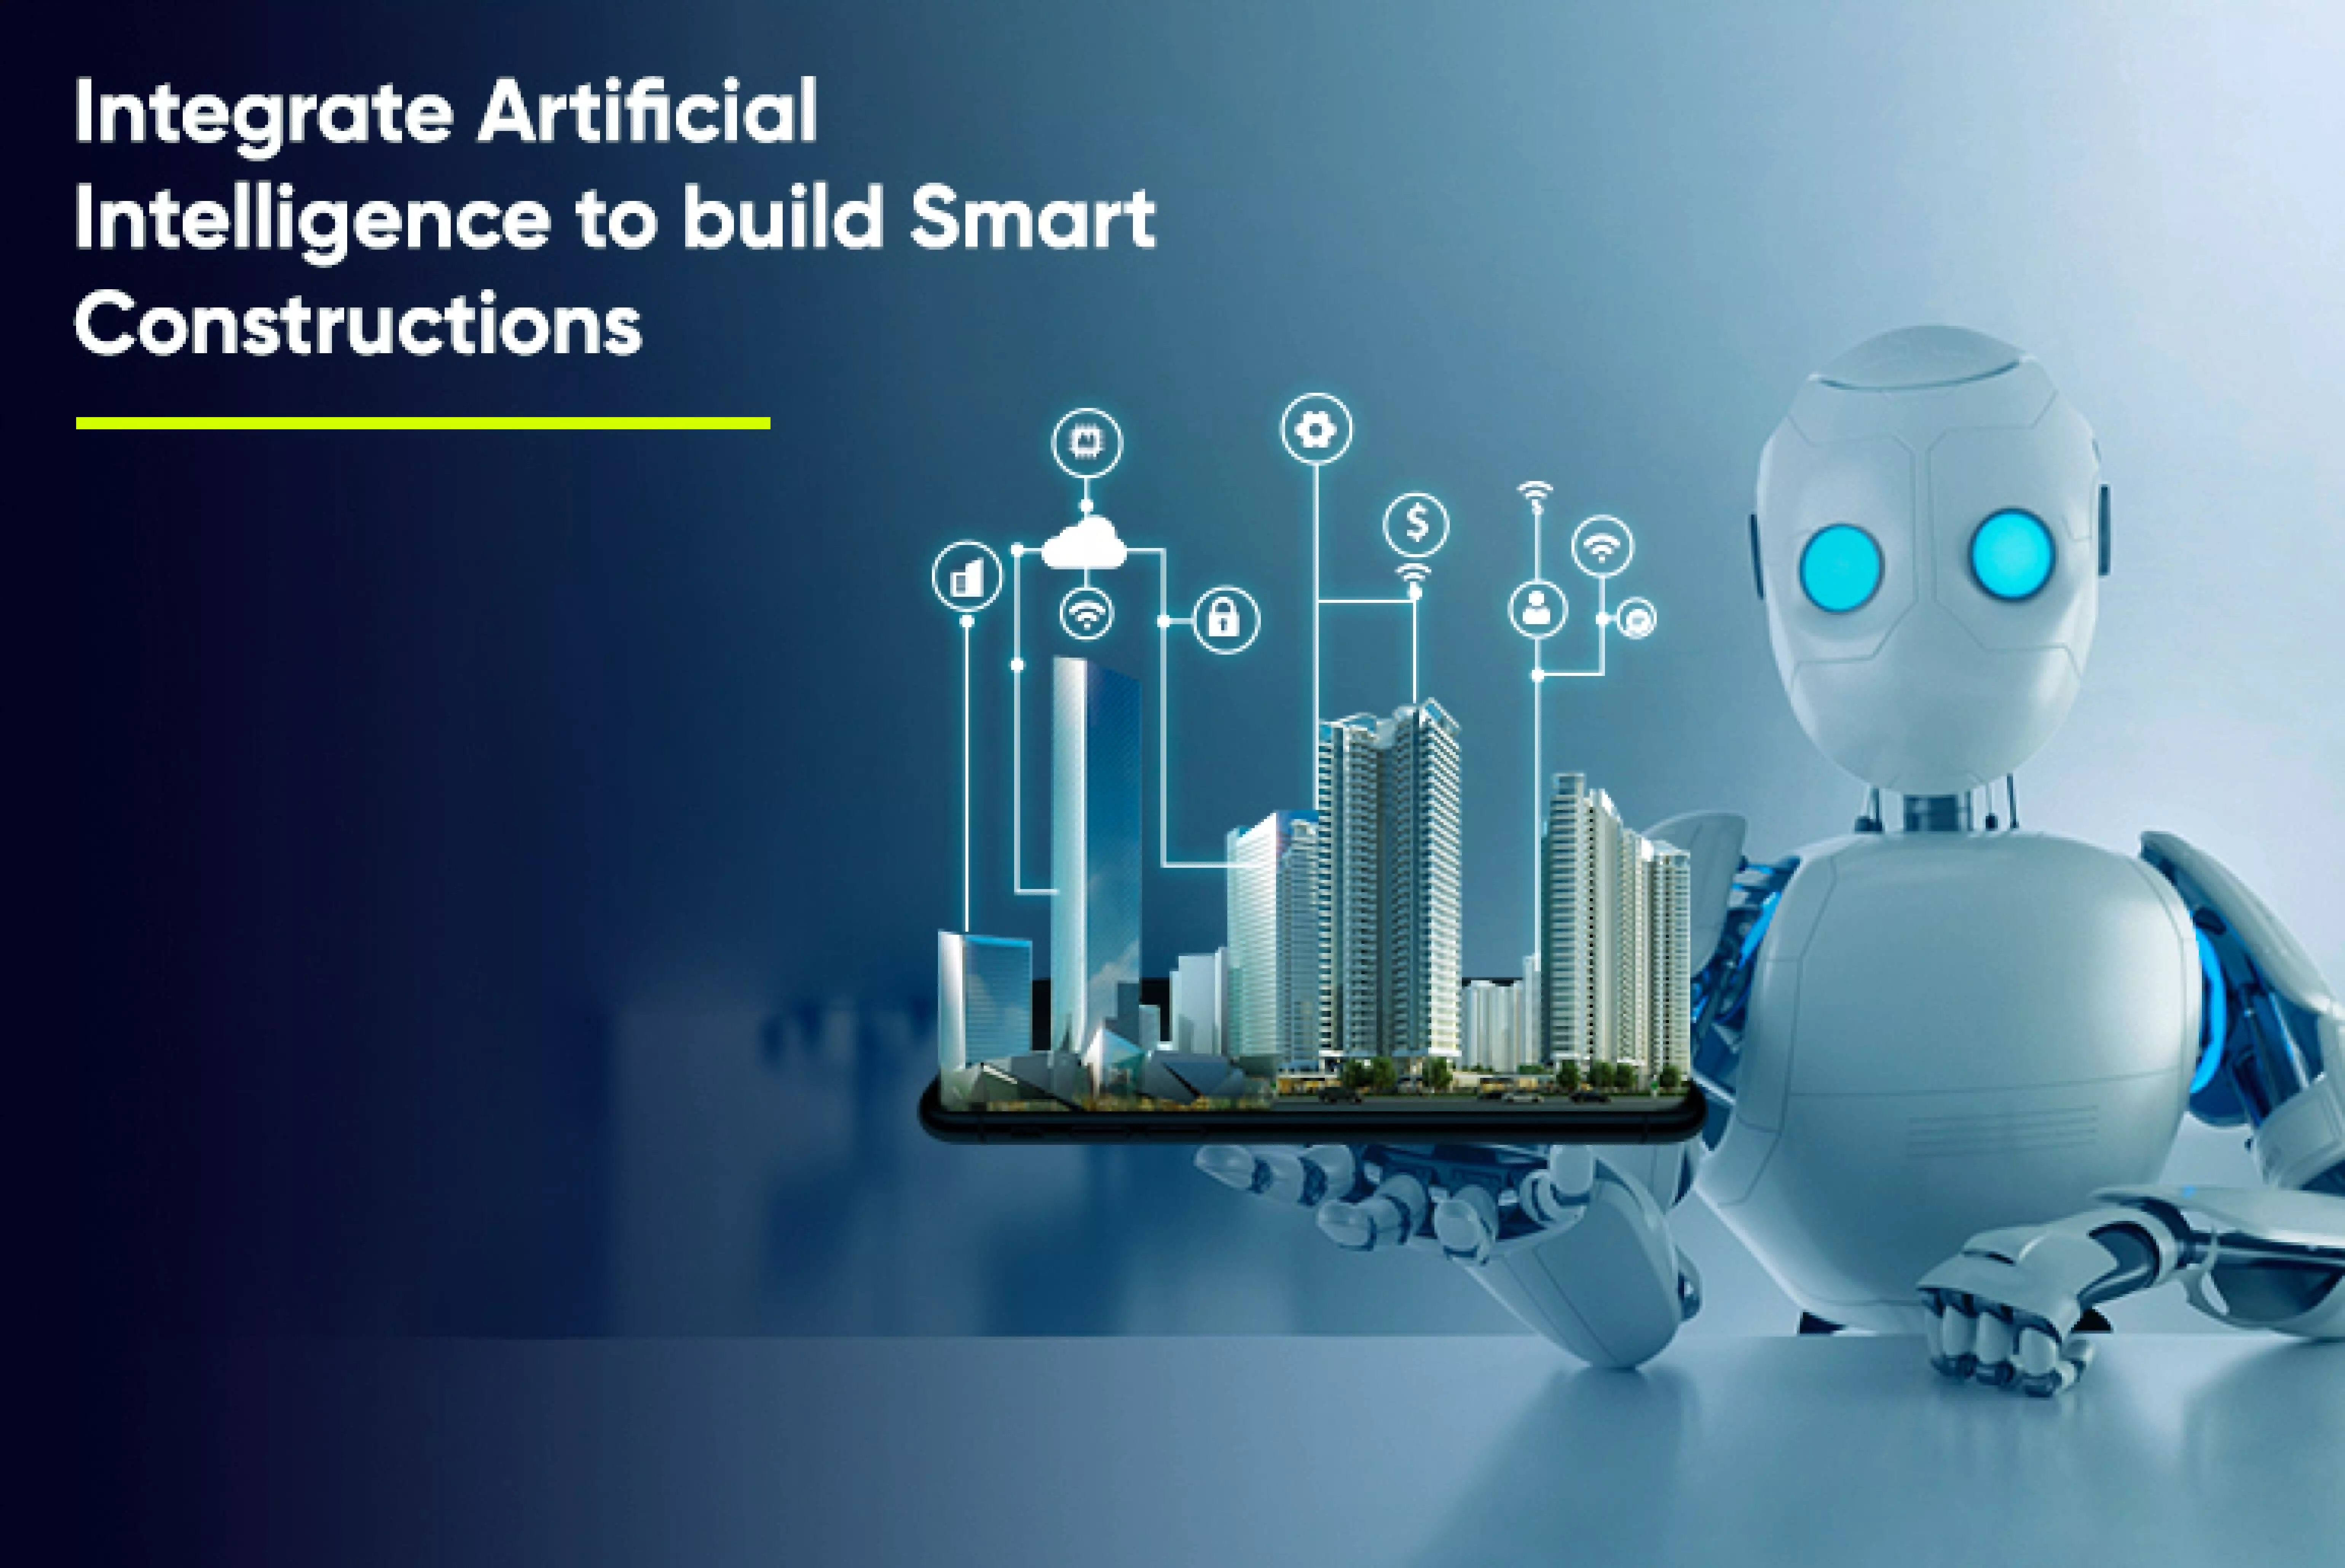 Smart Construction Build Smarter With Artificial Intelligence_Thum